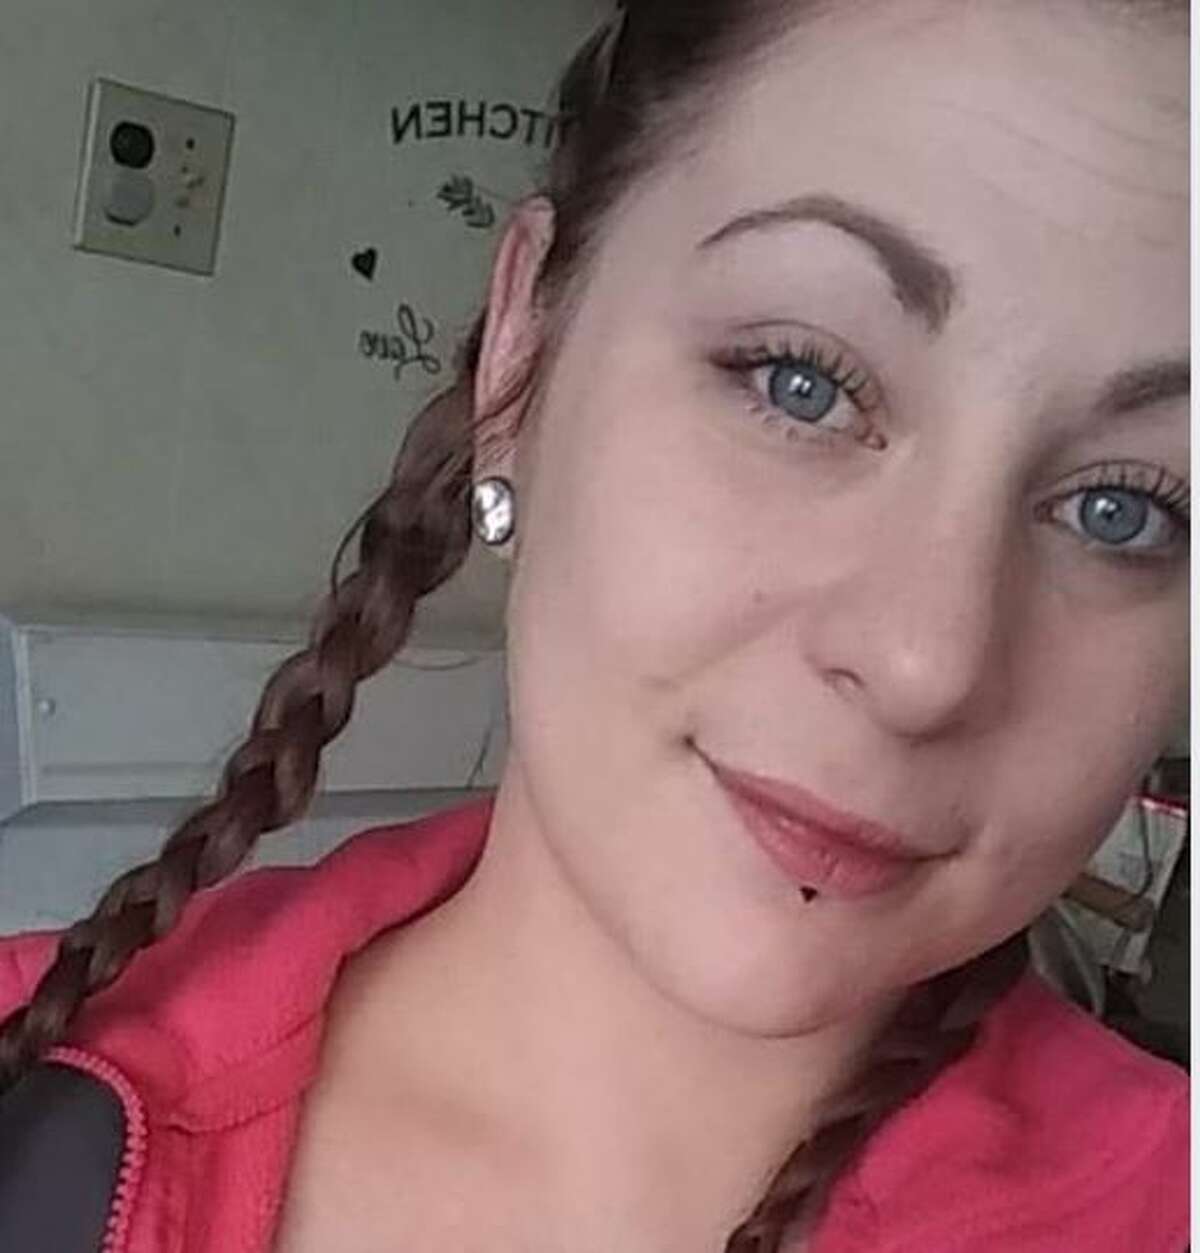 Allyzibeth A. Lamont, 22, was killed in 2019. Her employer, a Johnstown deli owner, is facing trial in May 2021 for paying someone to beat her to death.